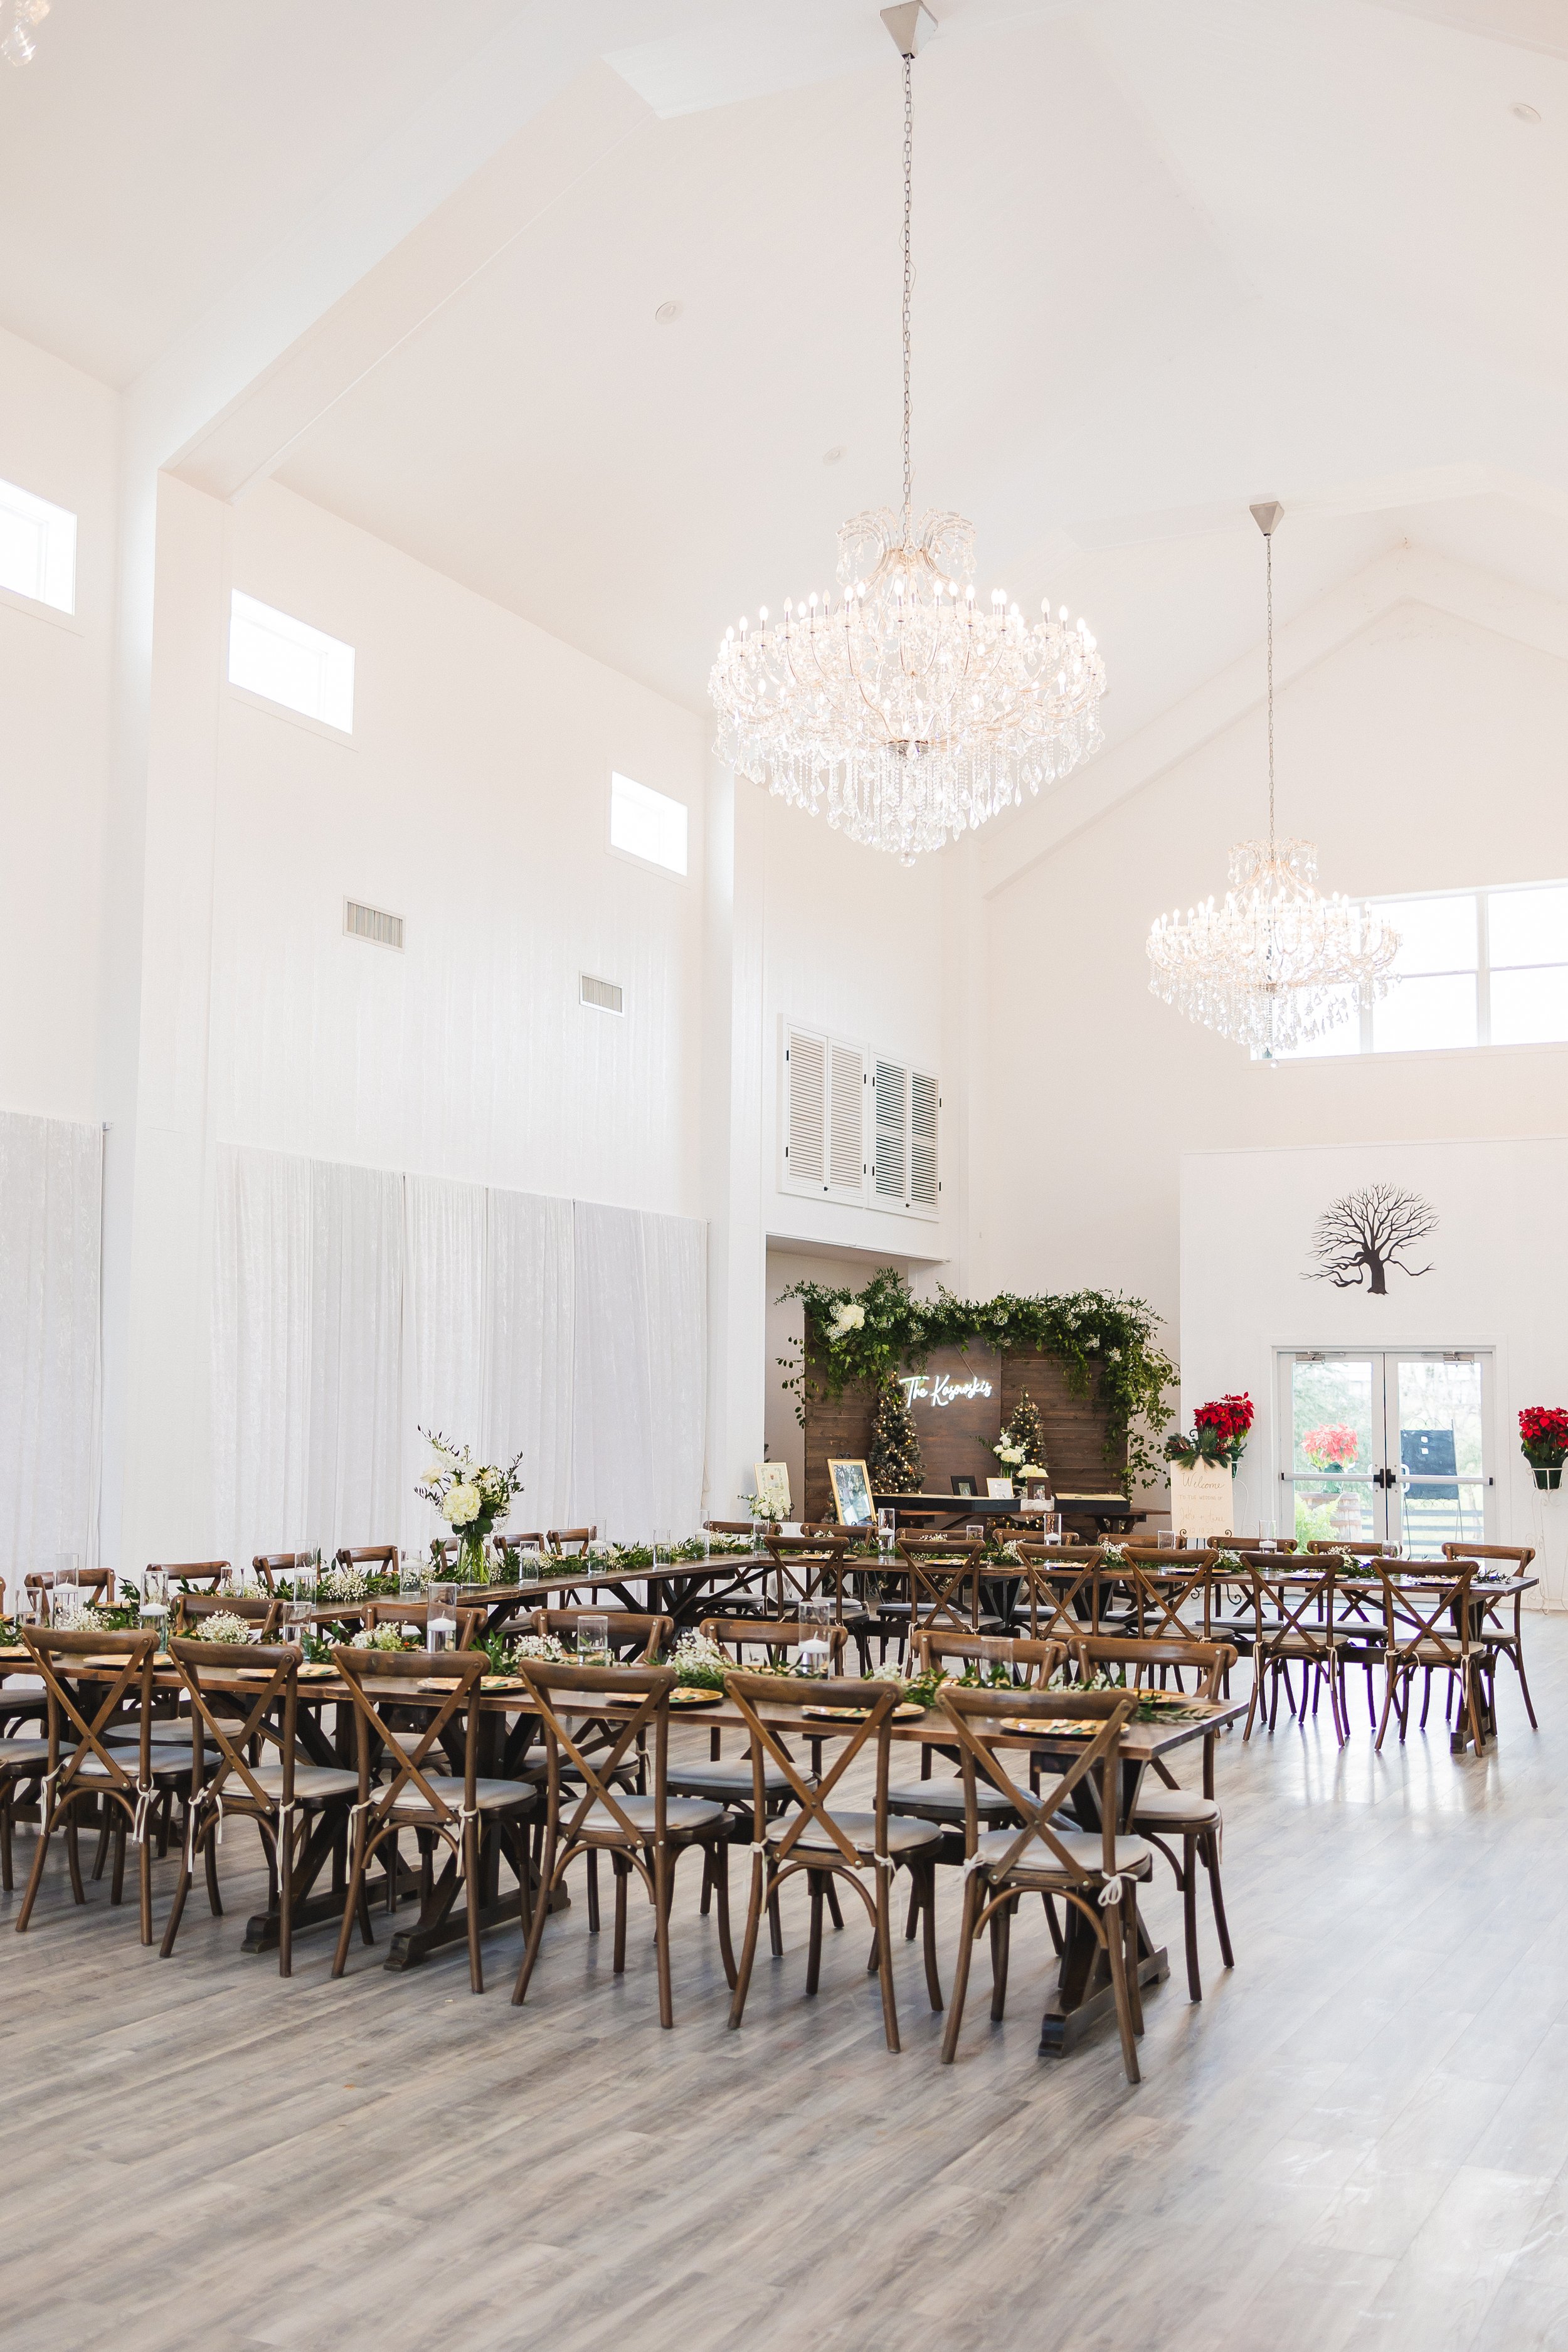 Celebrate luminous love at wedding venues bathed in natural light. Discover radiant settings for your perfect day.